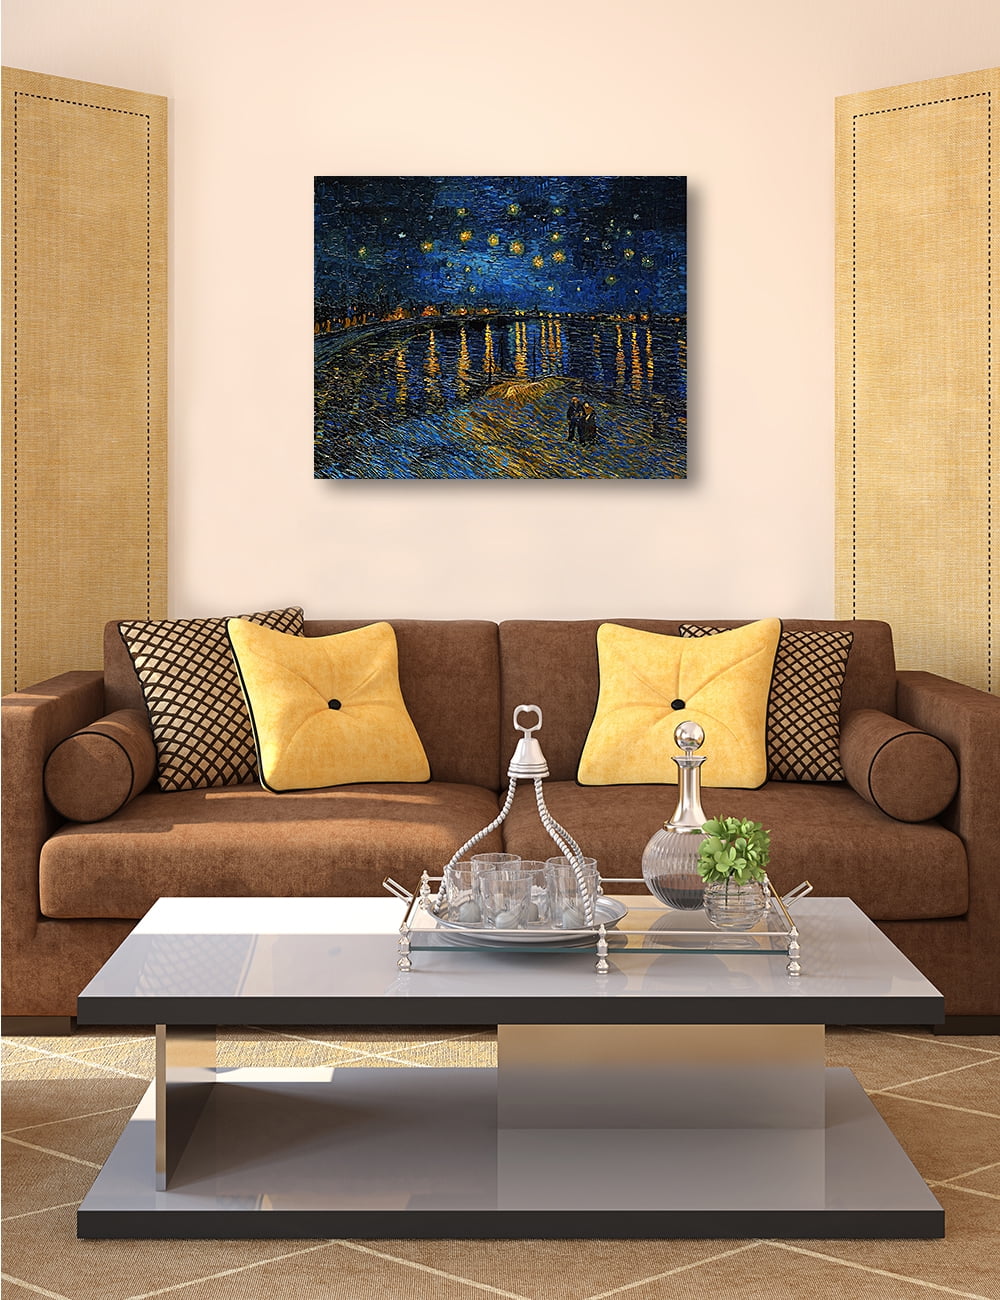 DECORARTS Starry Night Over The Rhone, Vincent Van Gogh Art Reproduction. Giclee  Print on Acid Free Cotton Canvas Art for Wall Decor 20x16 in